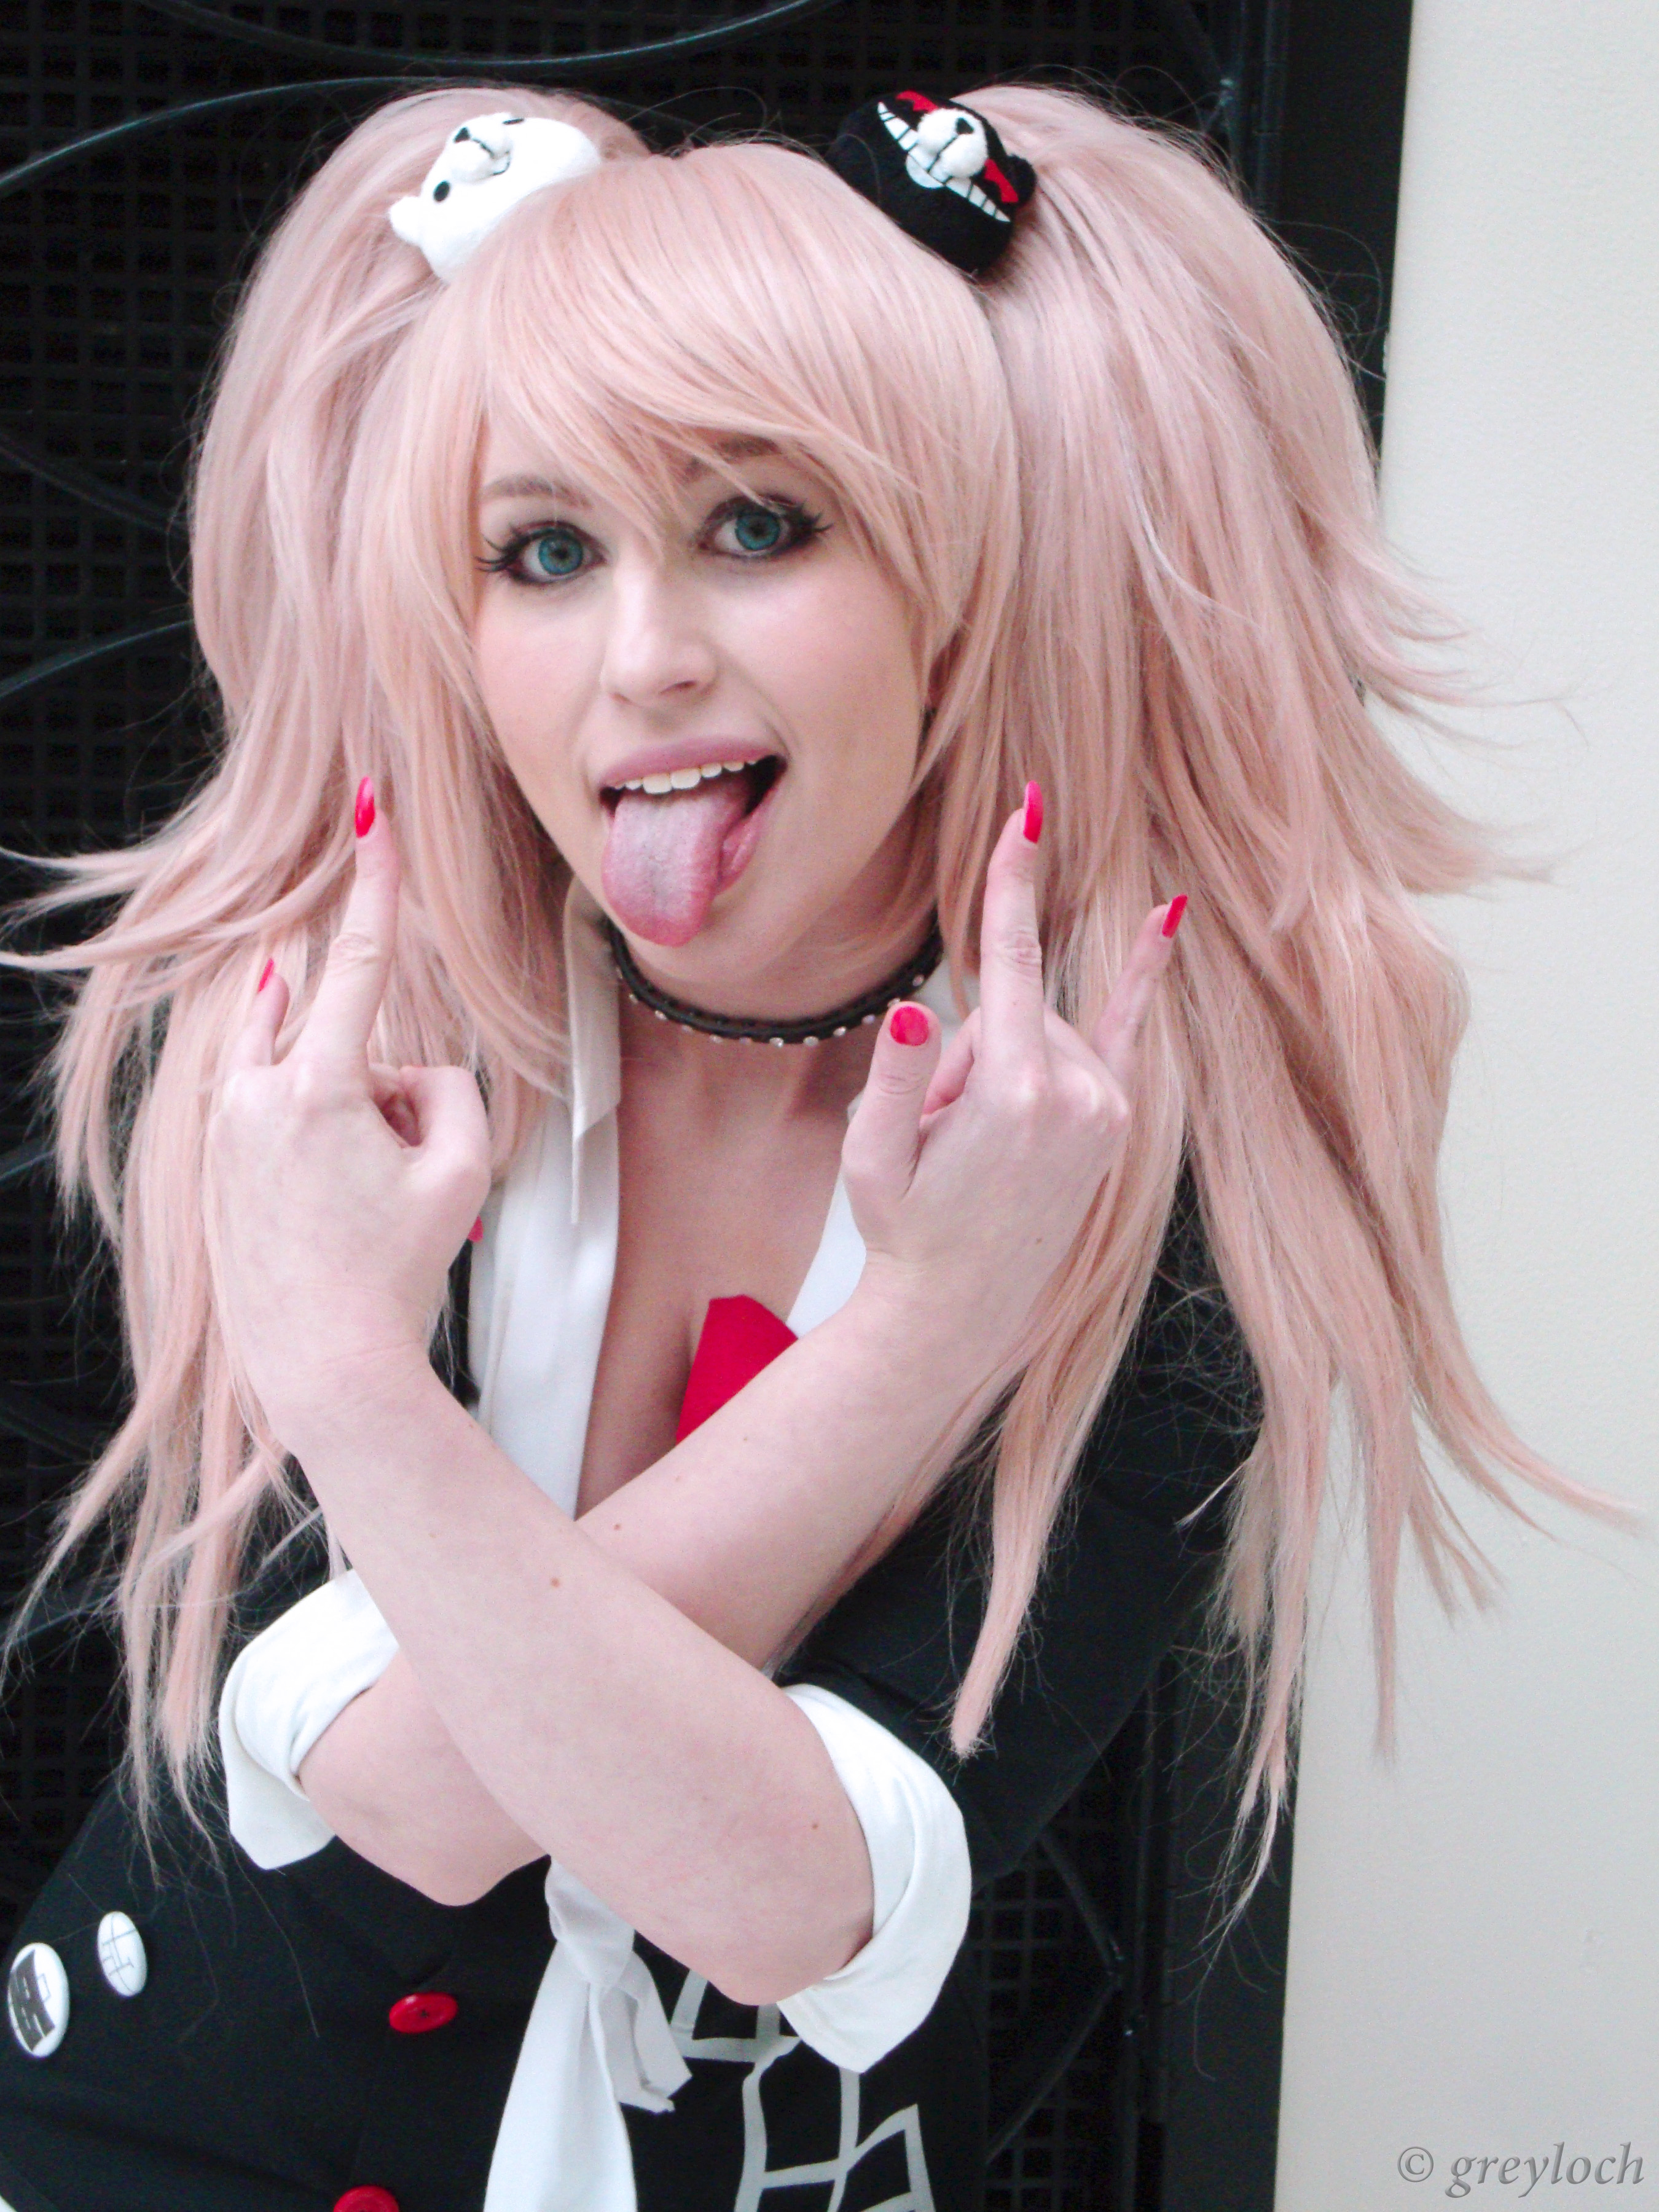 𝐵𝑒𝑙𝑙𝑎 | Junko Enoshima a.k.a the ultimate of 🅳🅴🆂🅿︎🅰︎🅸🆁 - - - I  never planned on cosplaying Junko but I really wanted to ... | Instagram